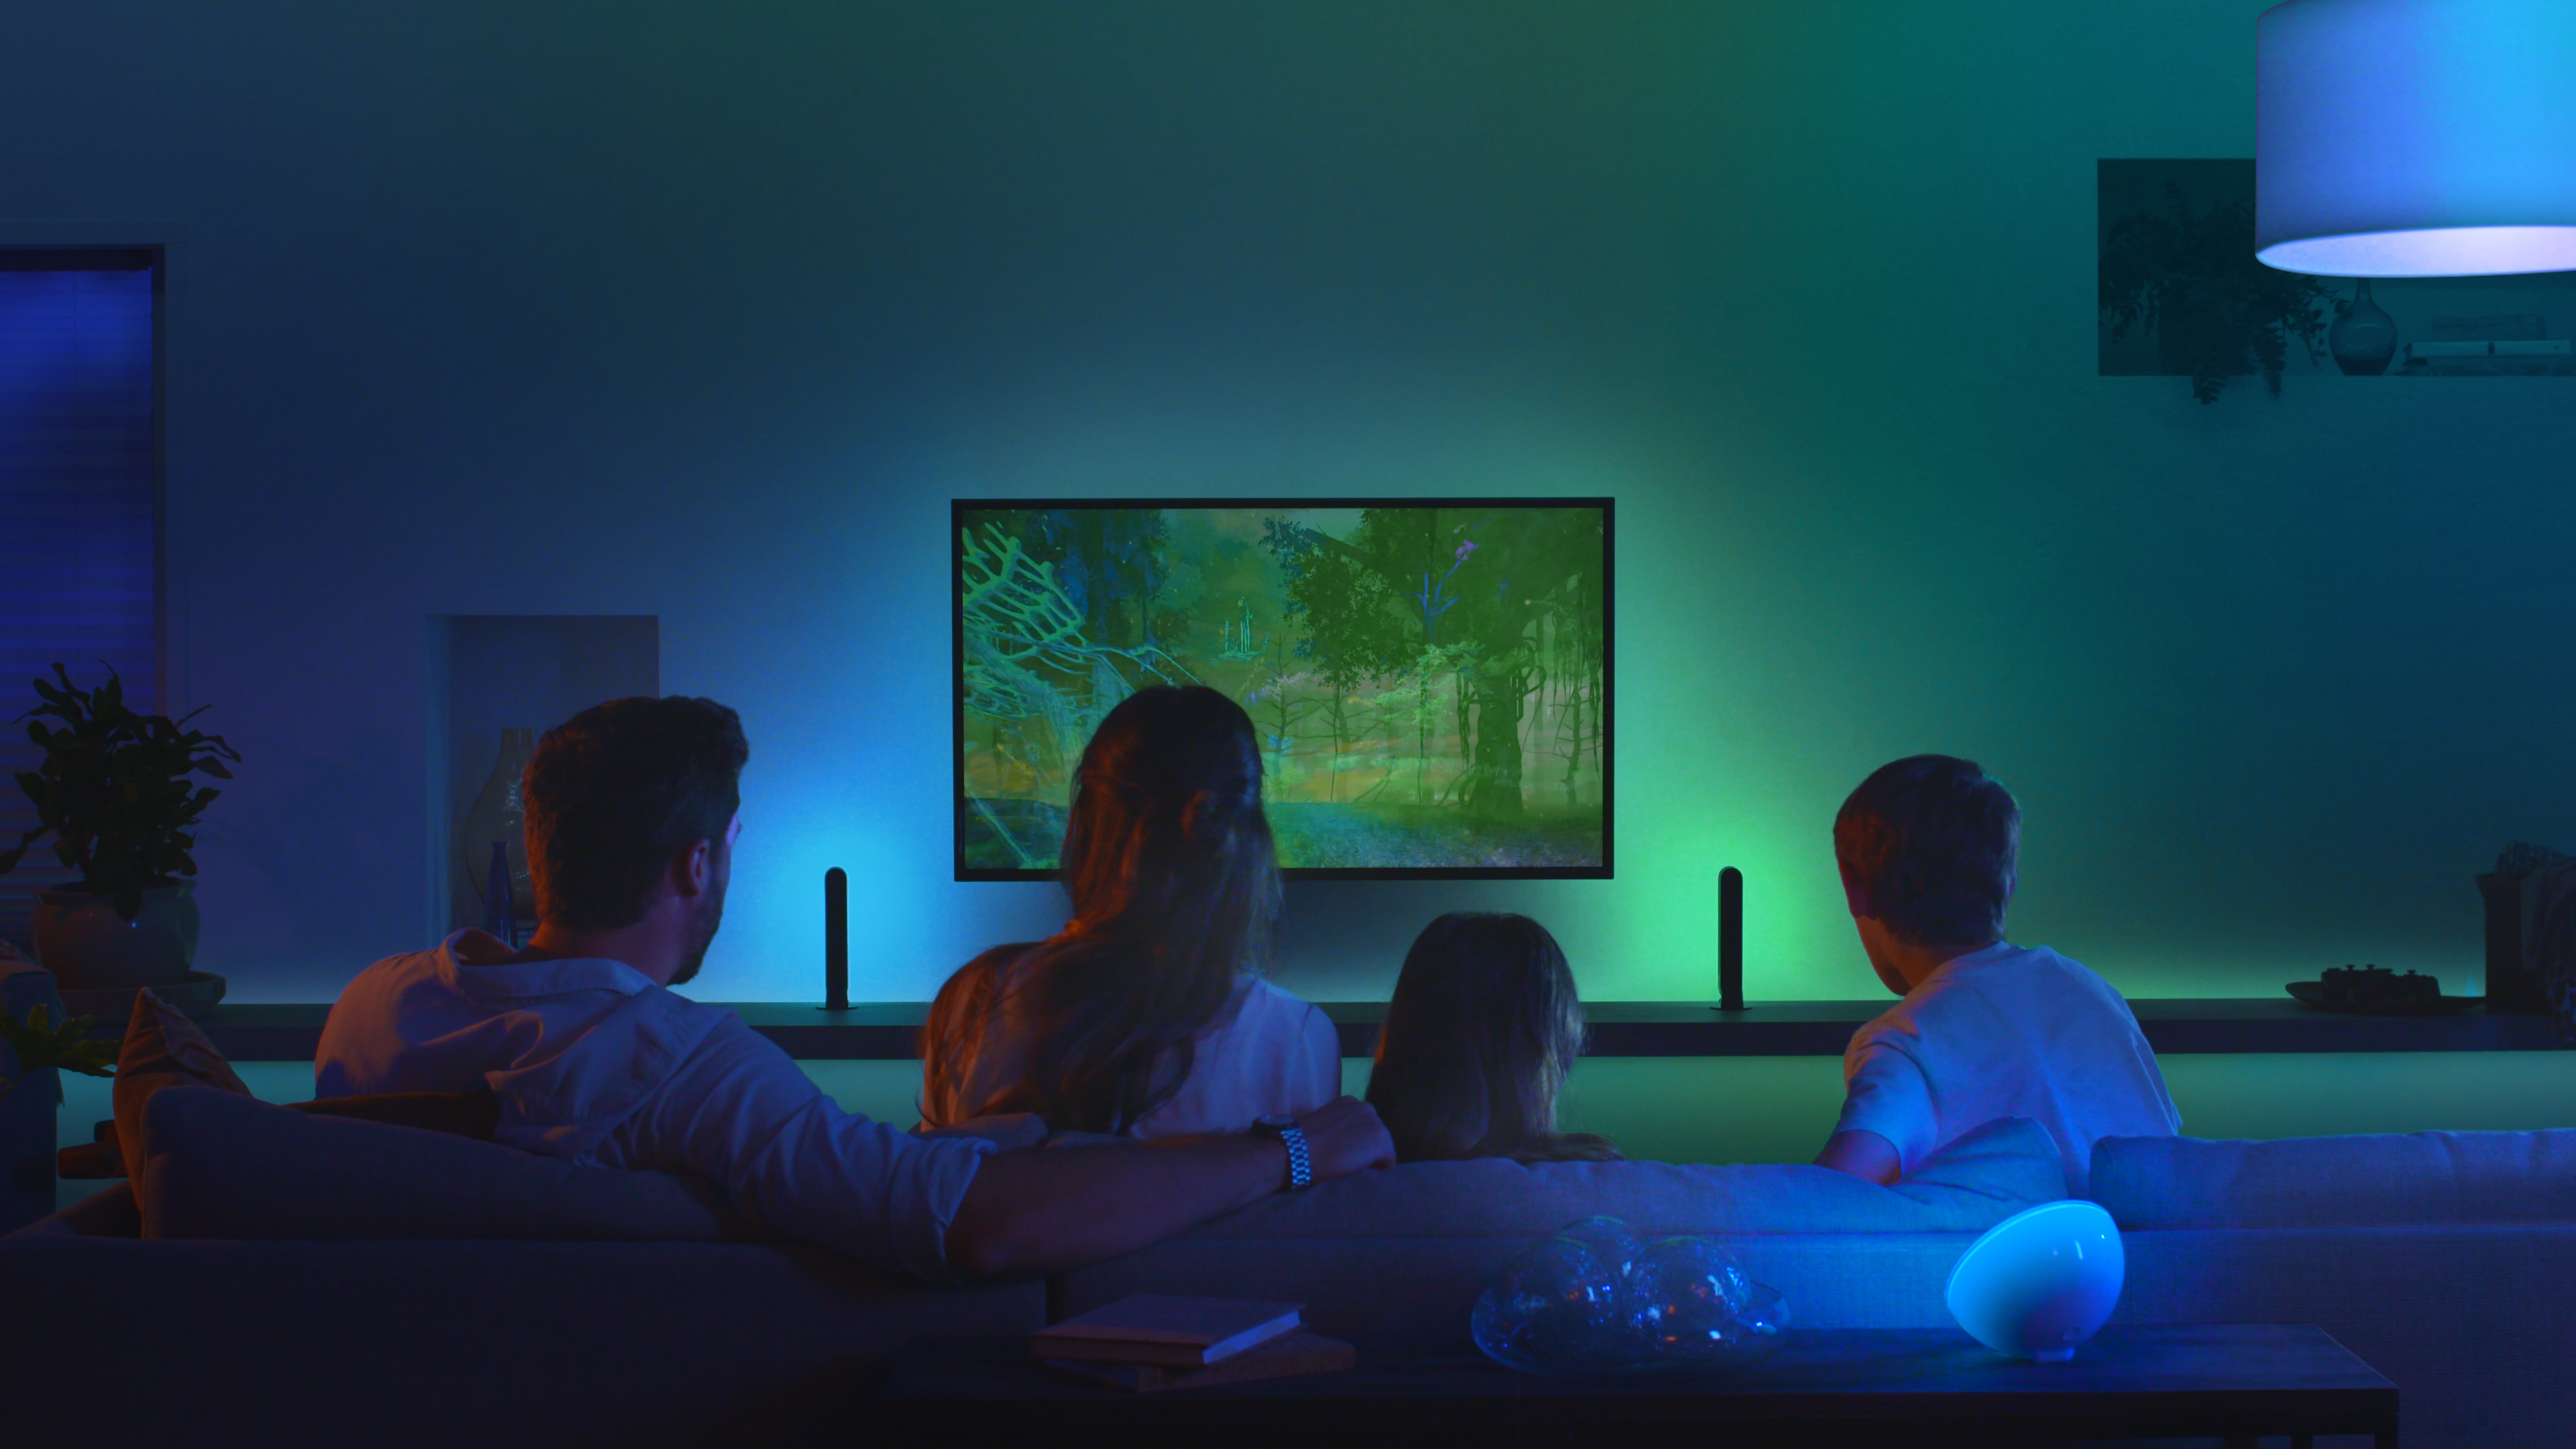 Philips Hue bulbs can now up your TV screen for immersive lighting | TechRadar